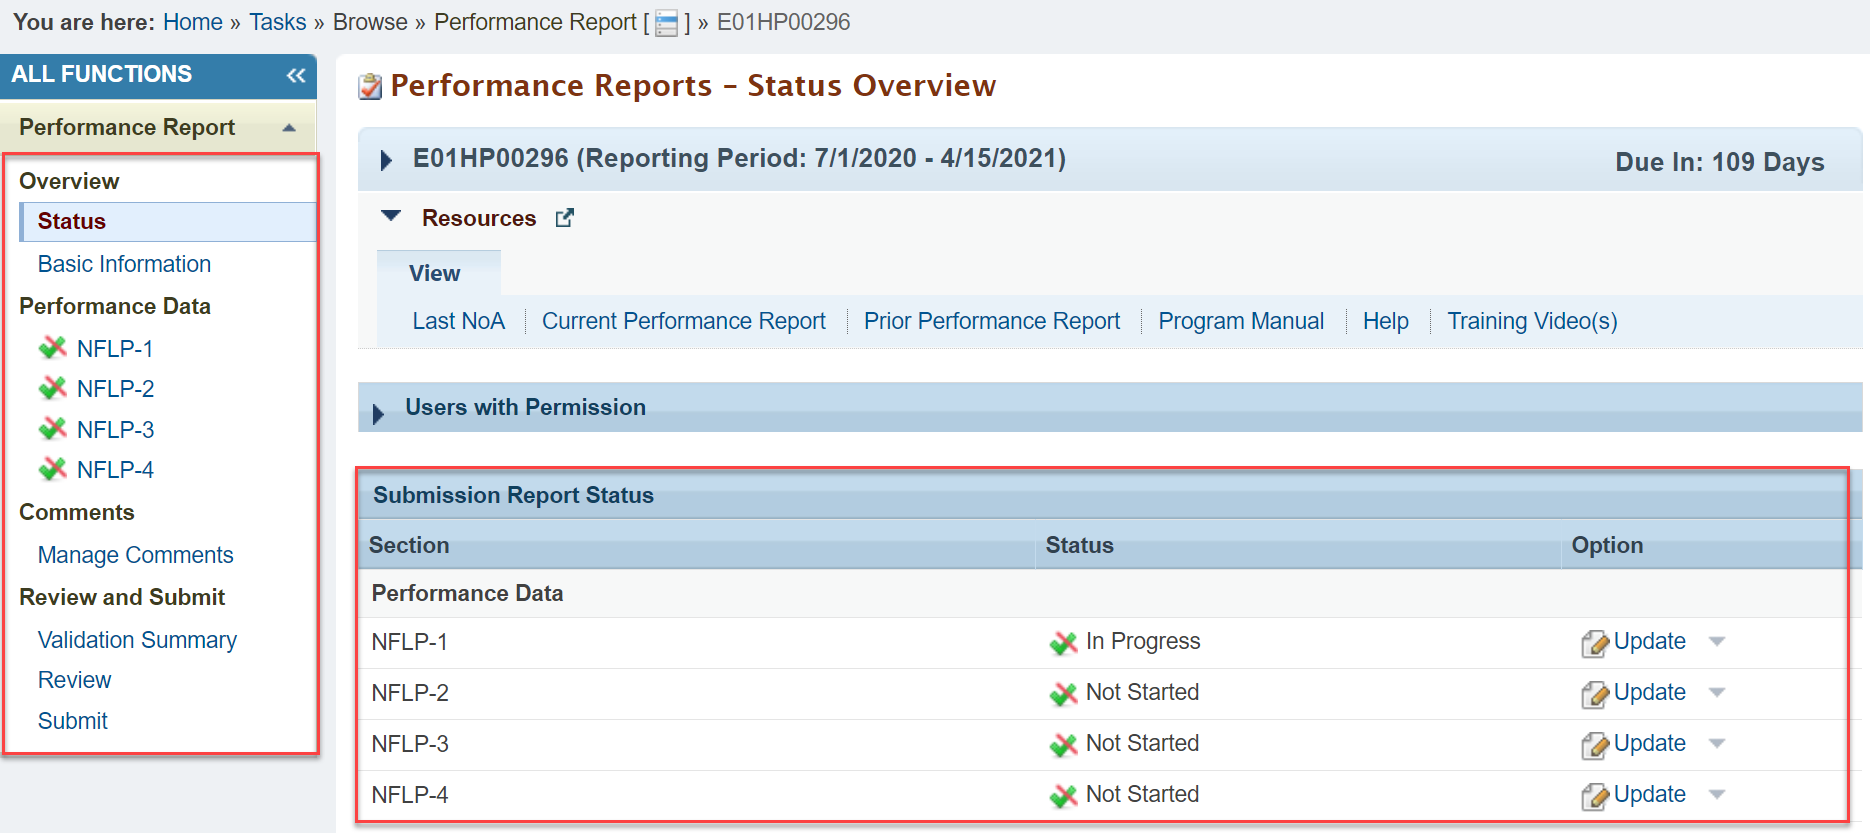 Screenshot of the Performance Reports Status Overview page for NFLP deliverable showing how to navigate the forms through the left menu or main page